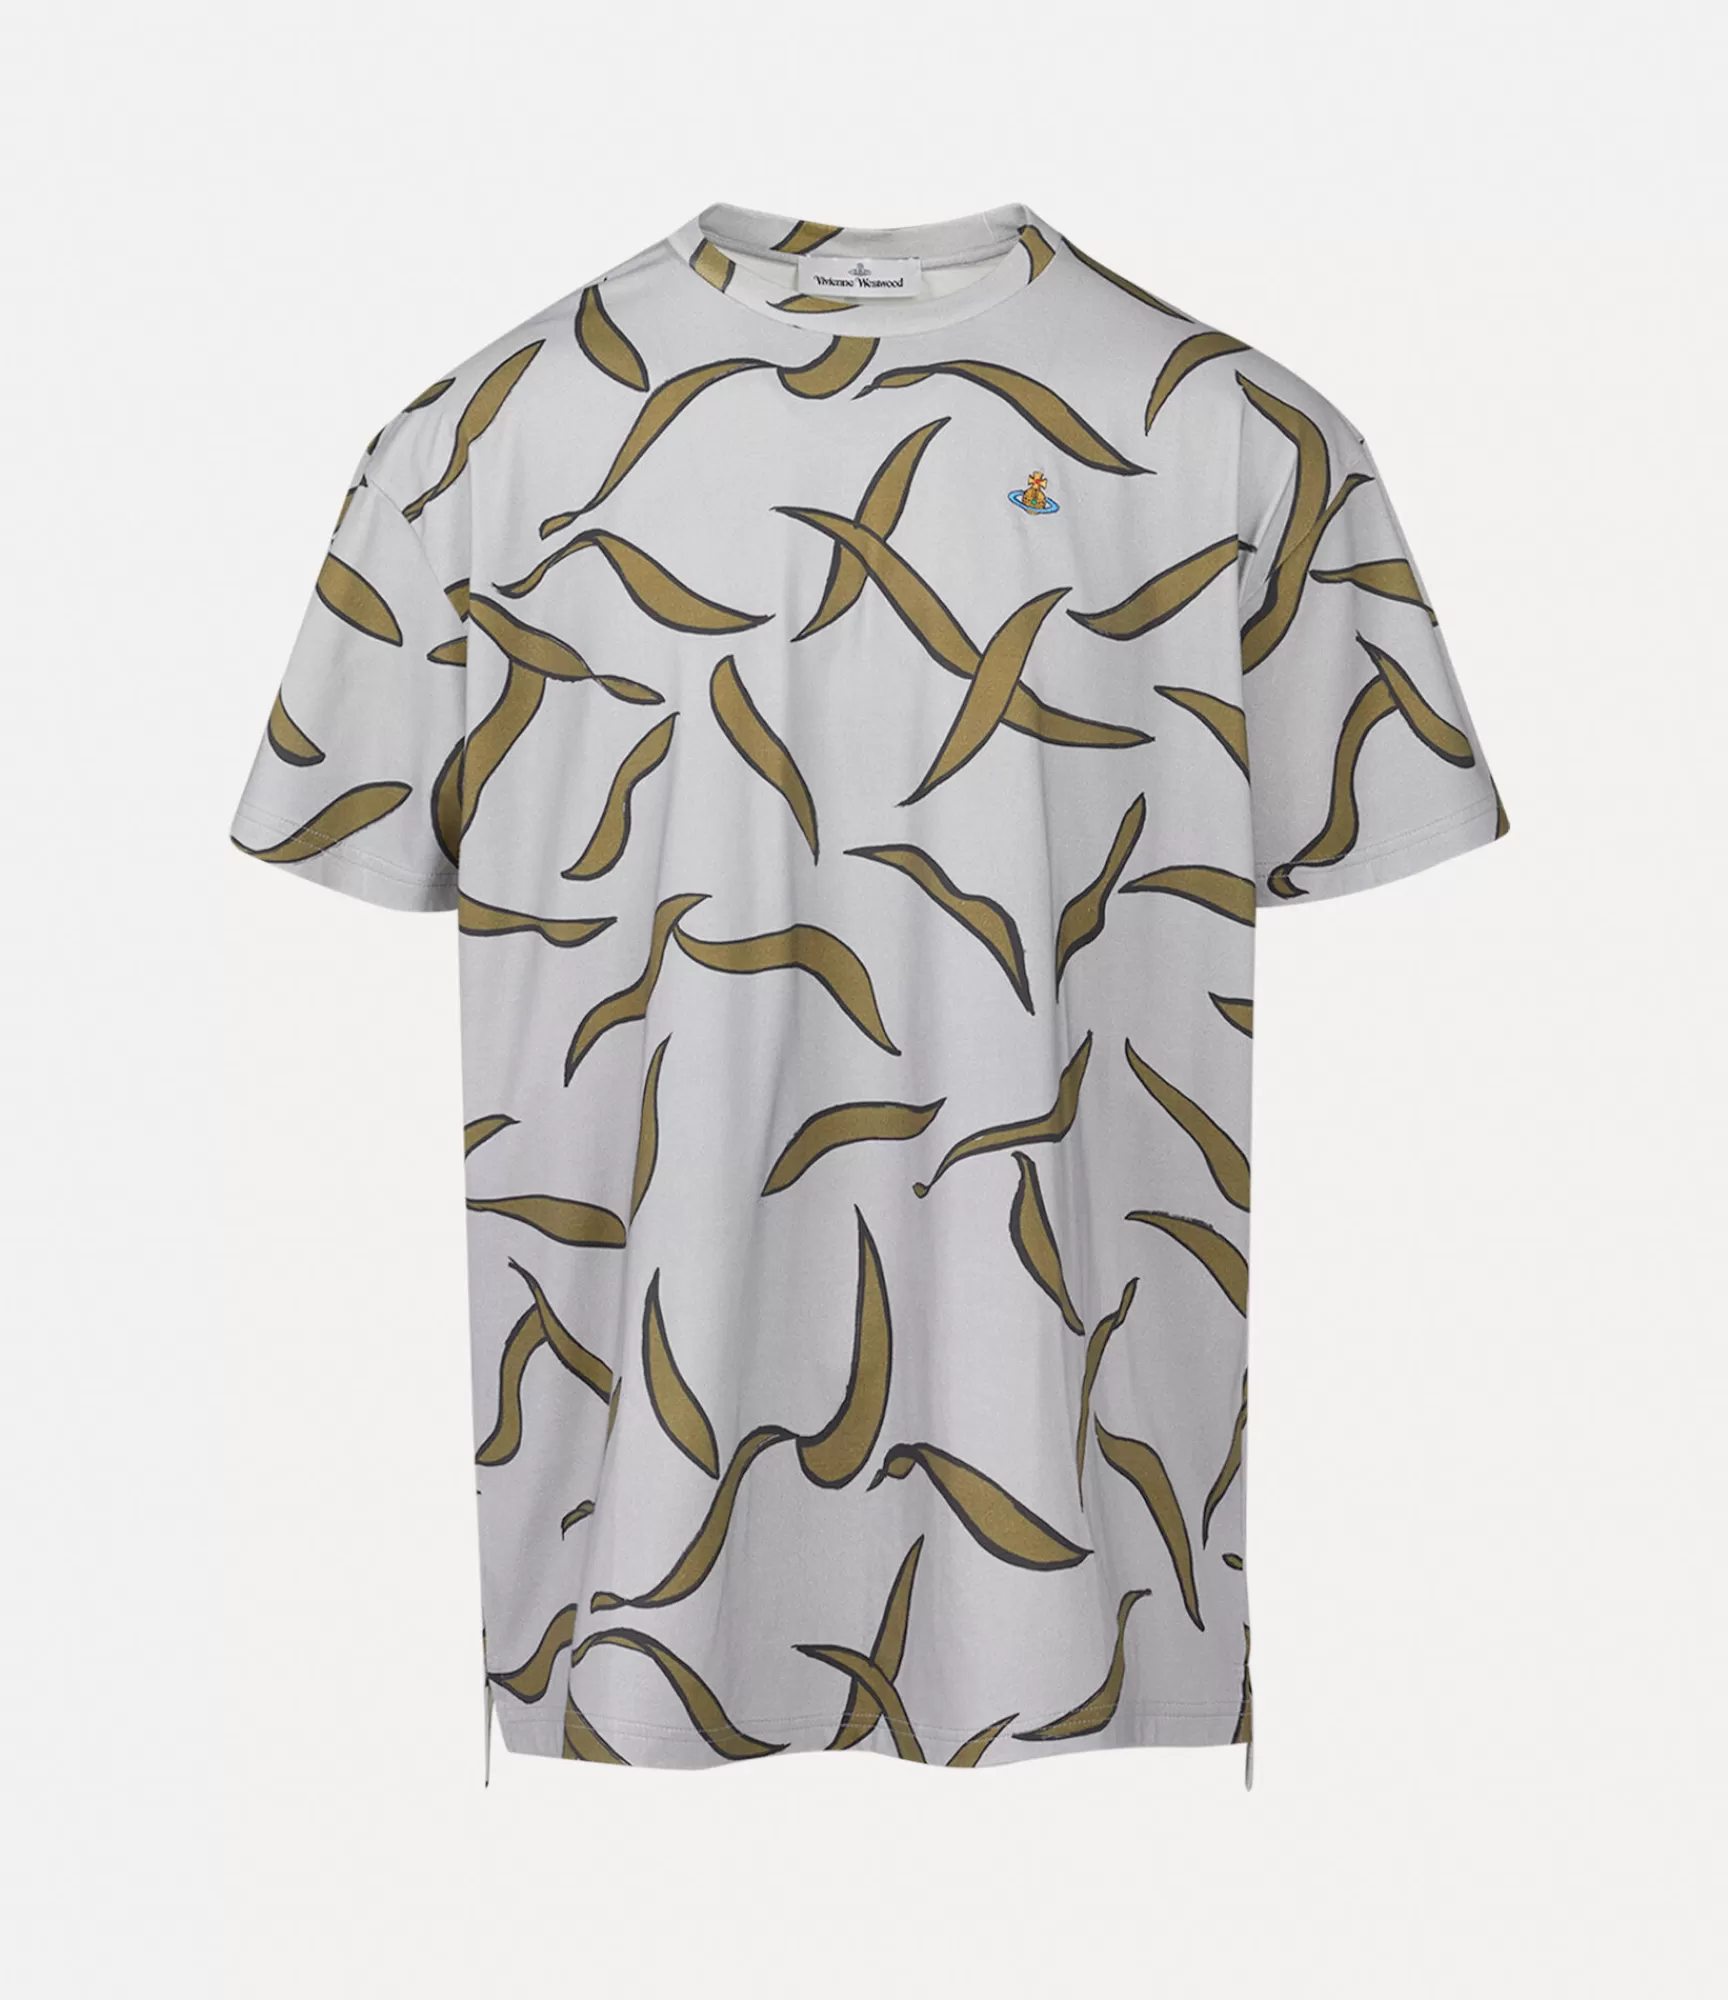 Vivienne Westwood T-Shirts and Polos | Sweatshirts and T-Shirts*Oversized t-shirt Grey